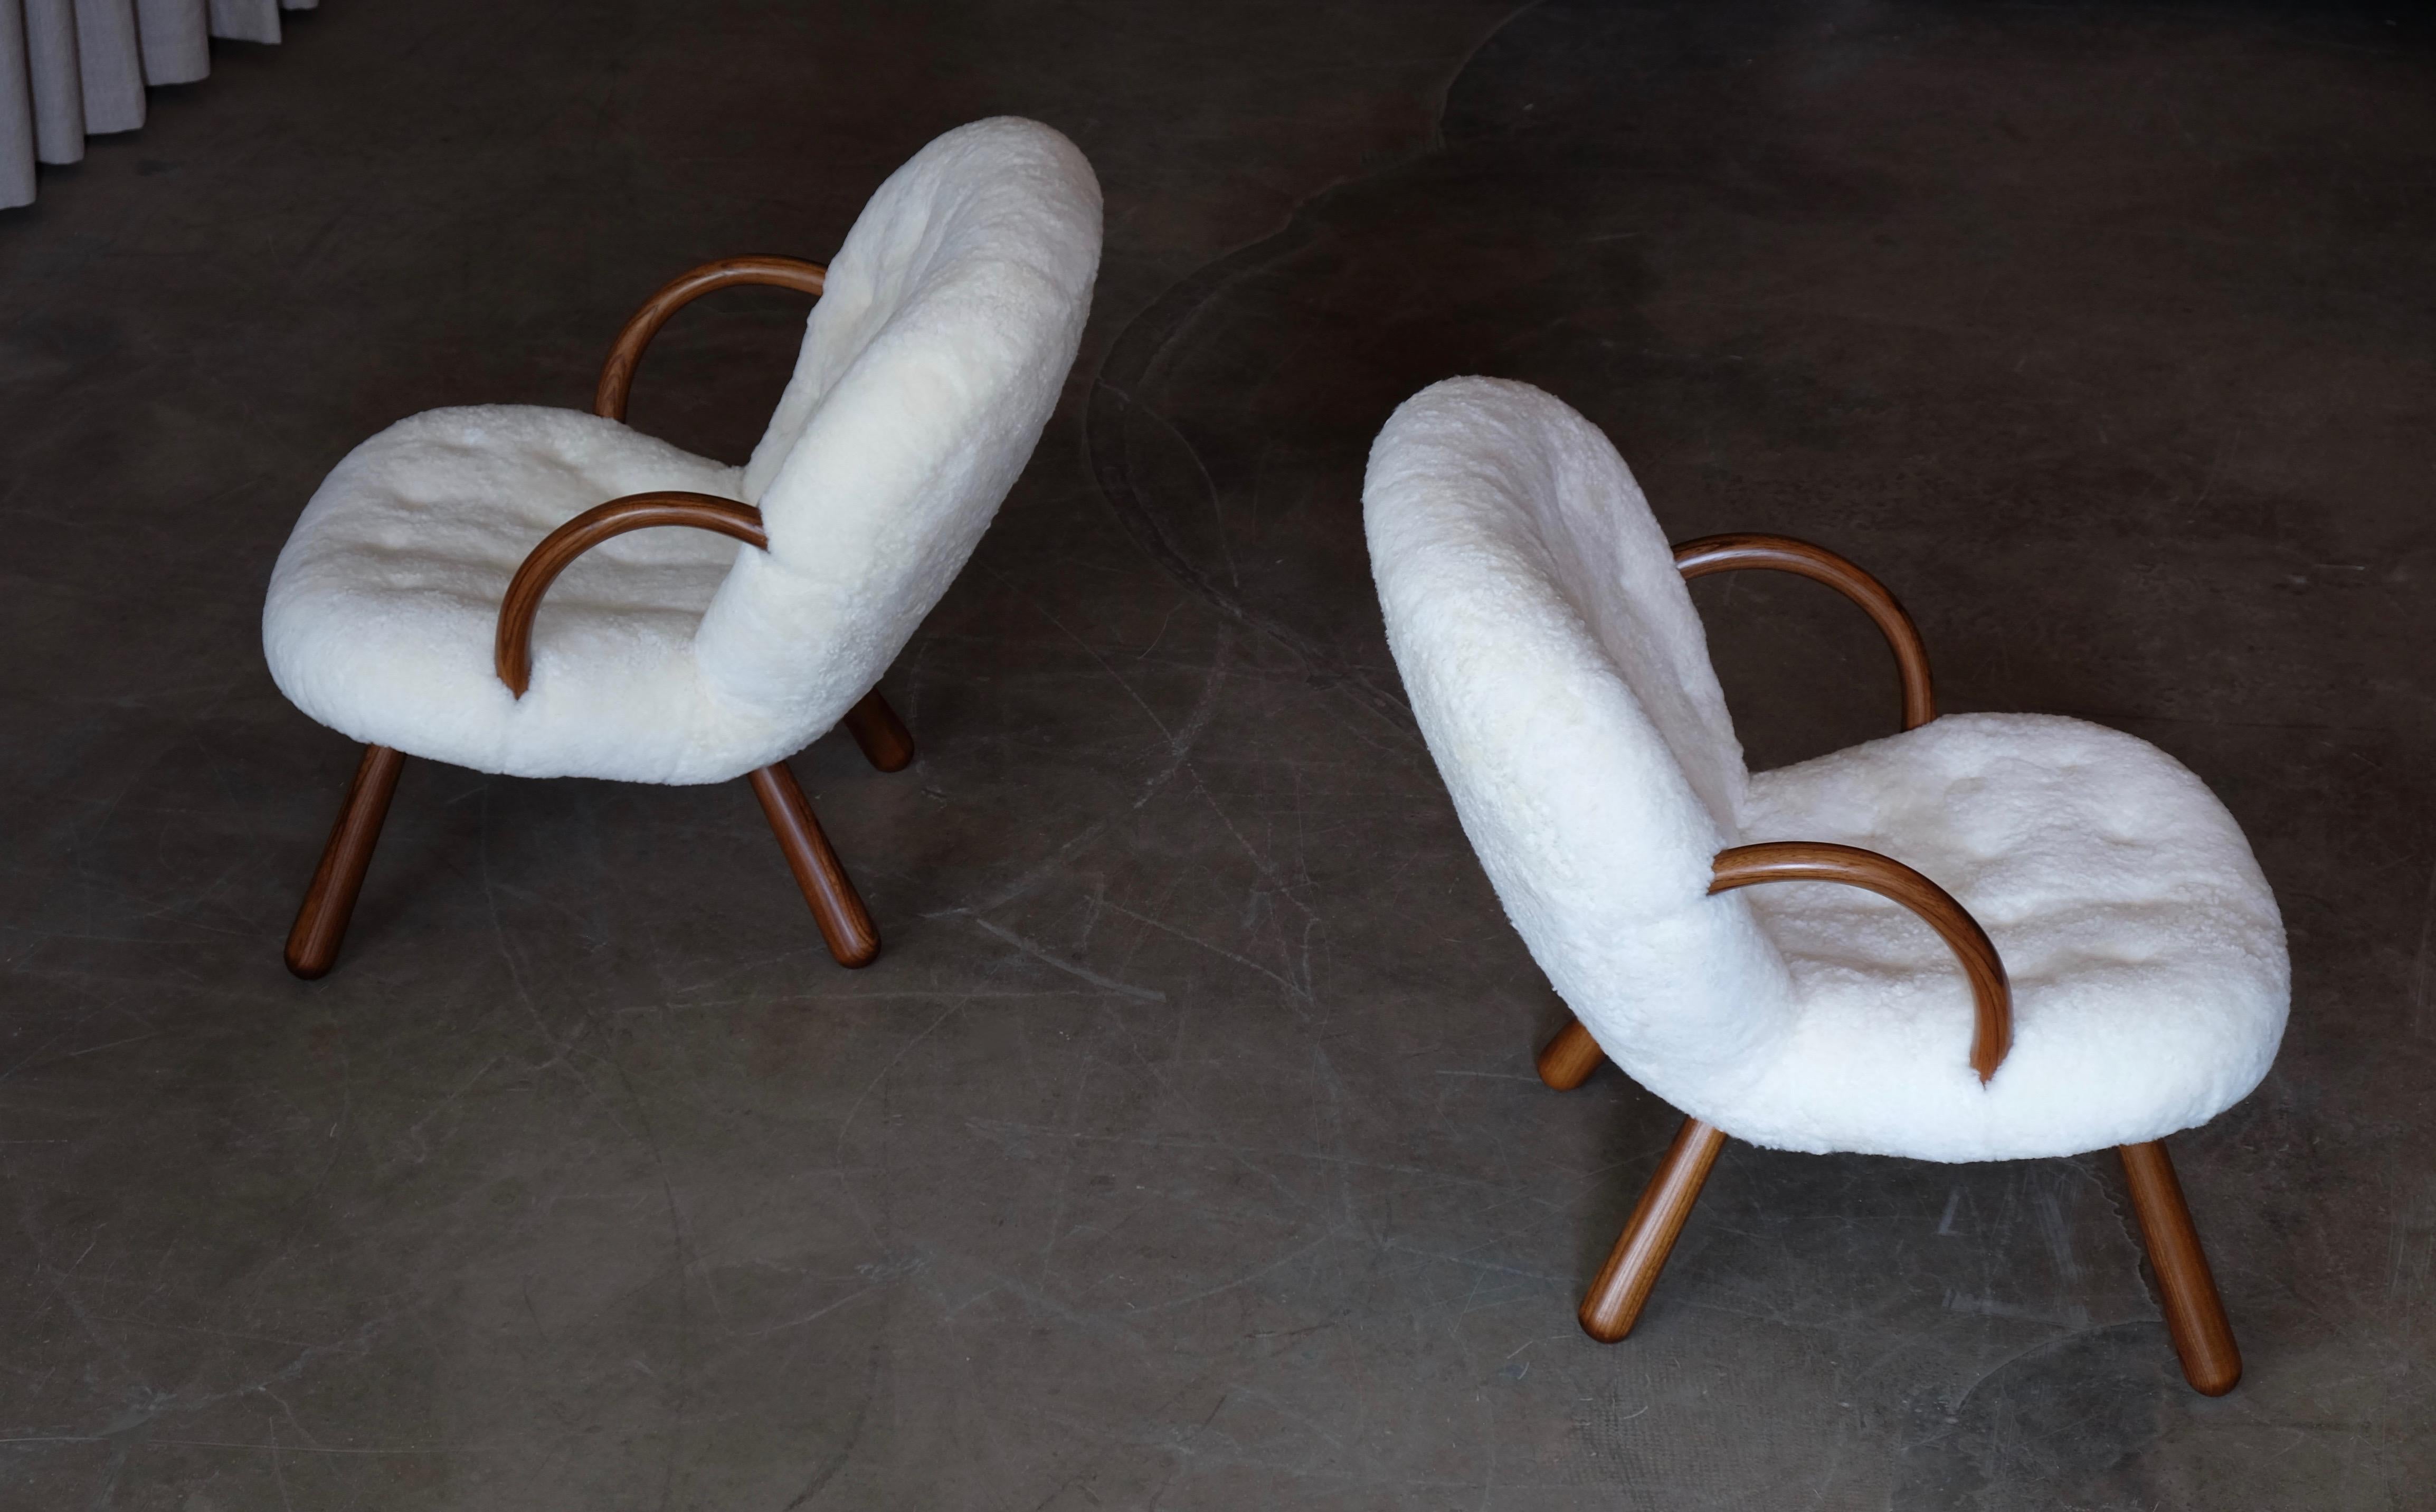 Philip Arctander clam chairs by Nordisk Stål & Møbel Central in Denmark, 1940s.
Completely restored. Excellent condition.
Global front door shipping, delivery within 7-14 days: €699.